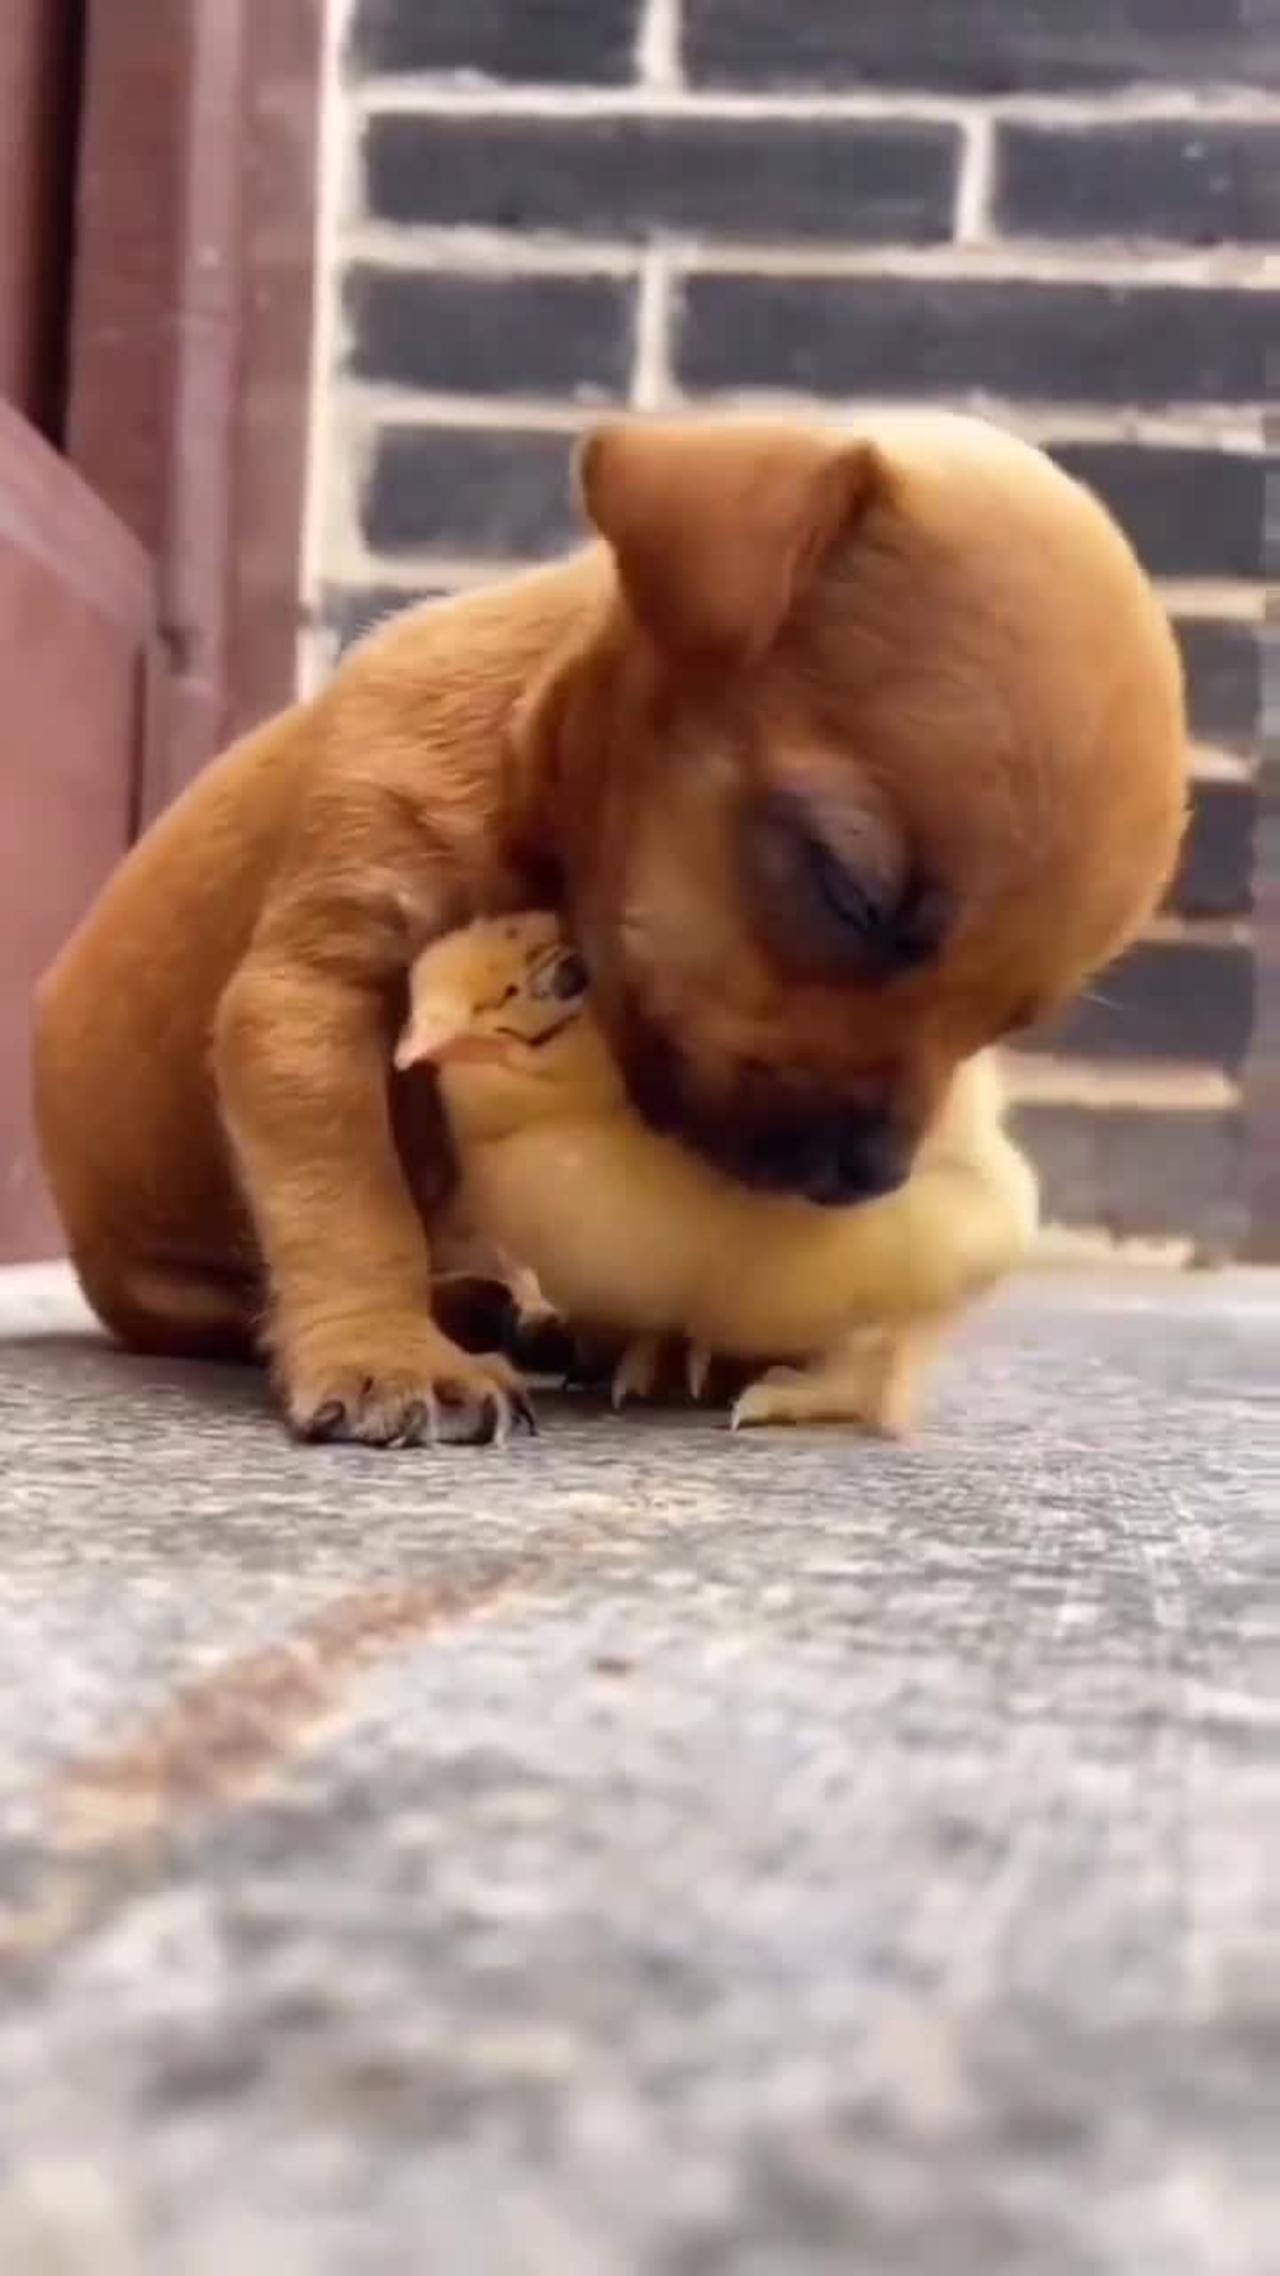 Cute puppy 😍😍😍 playing